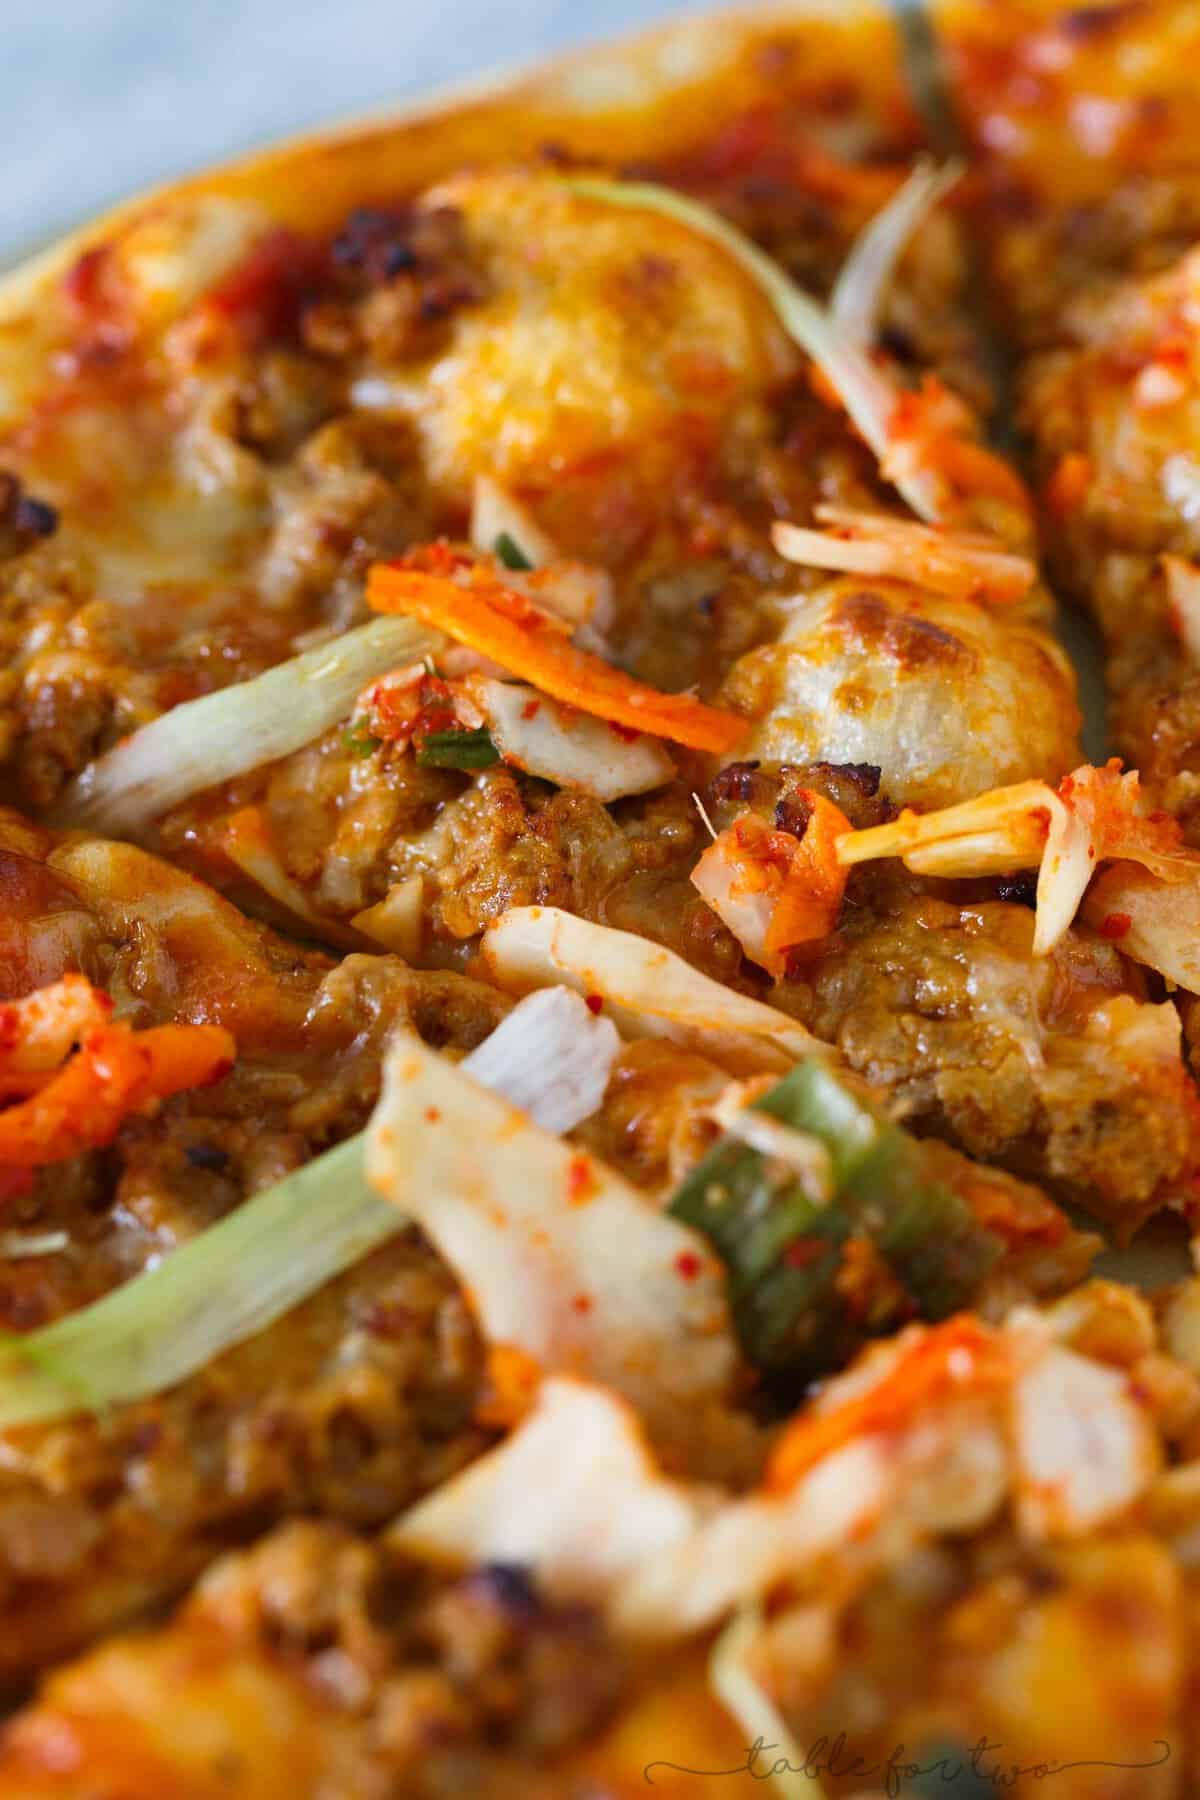 Italy meets Korea in this unique spicy Korean pork pizza recipe! This is a completely fun new way to make and eat pizza if you are a fan of Korean and Asian flavors! The flavors are so bold and perfectly balanced!